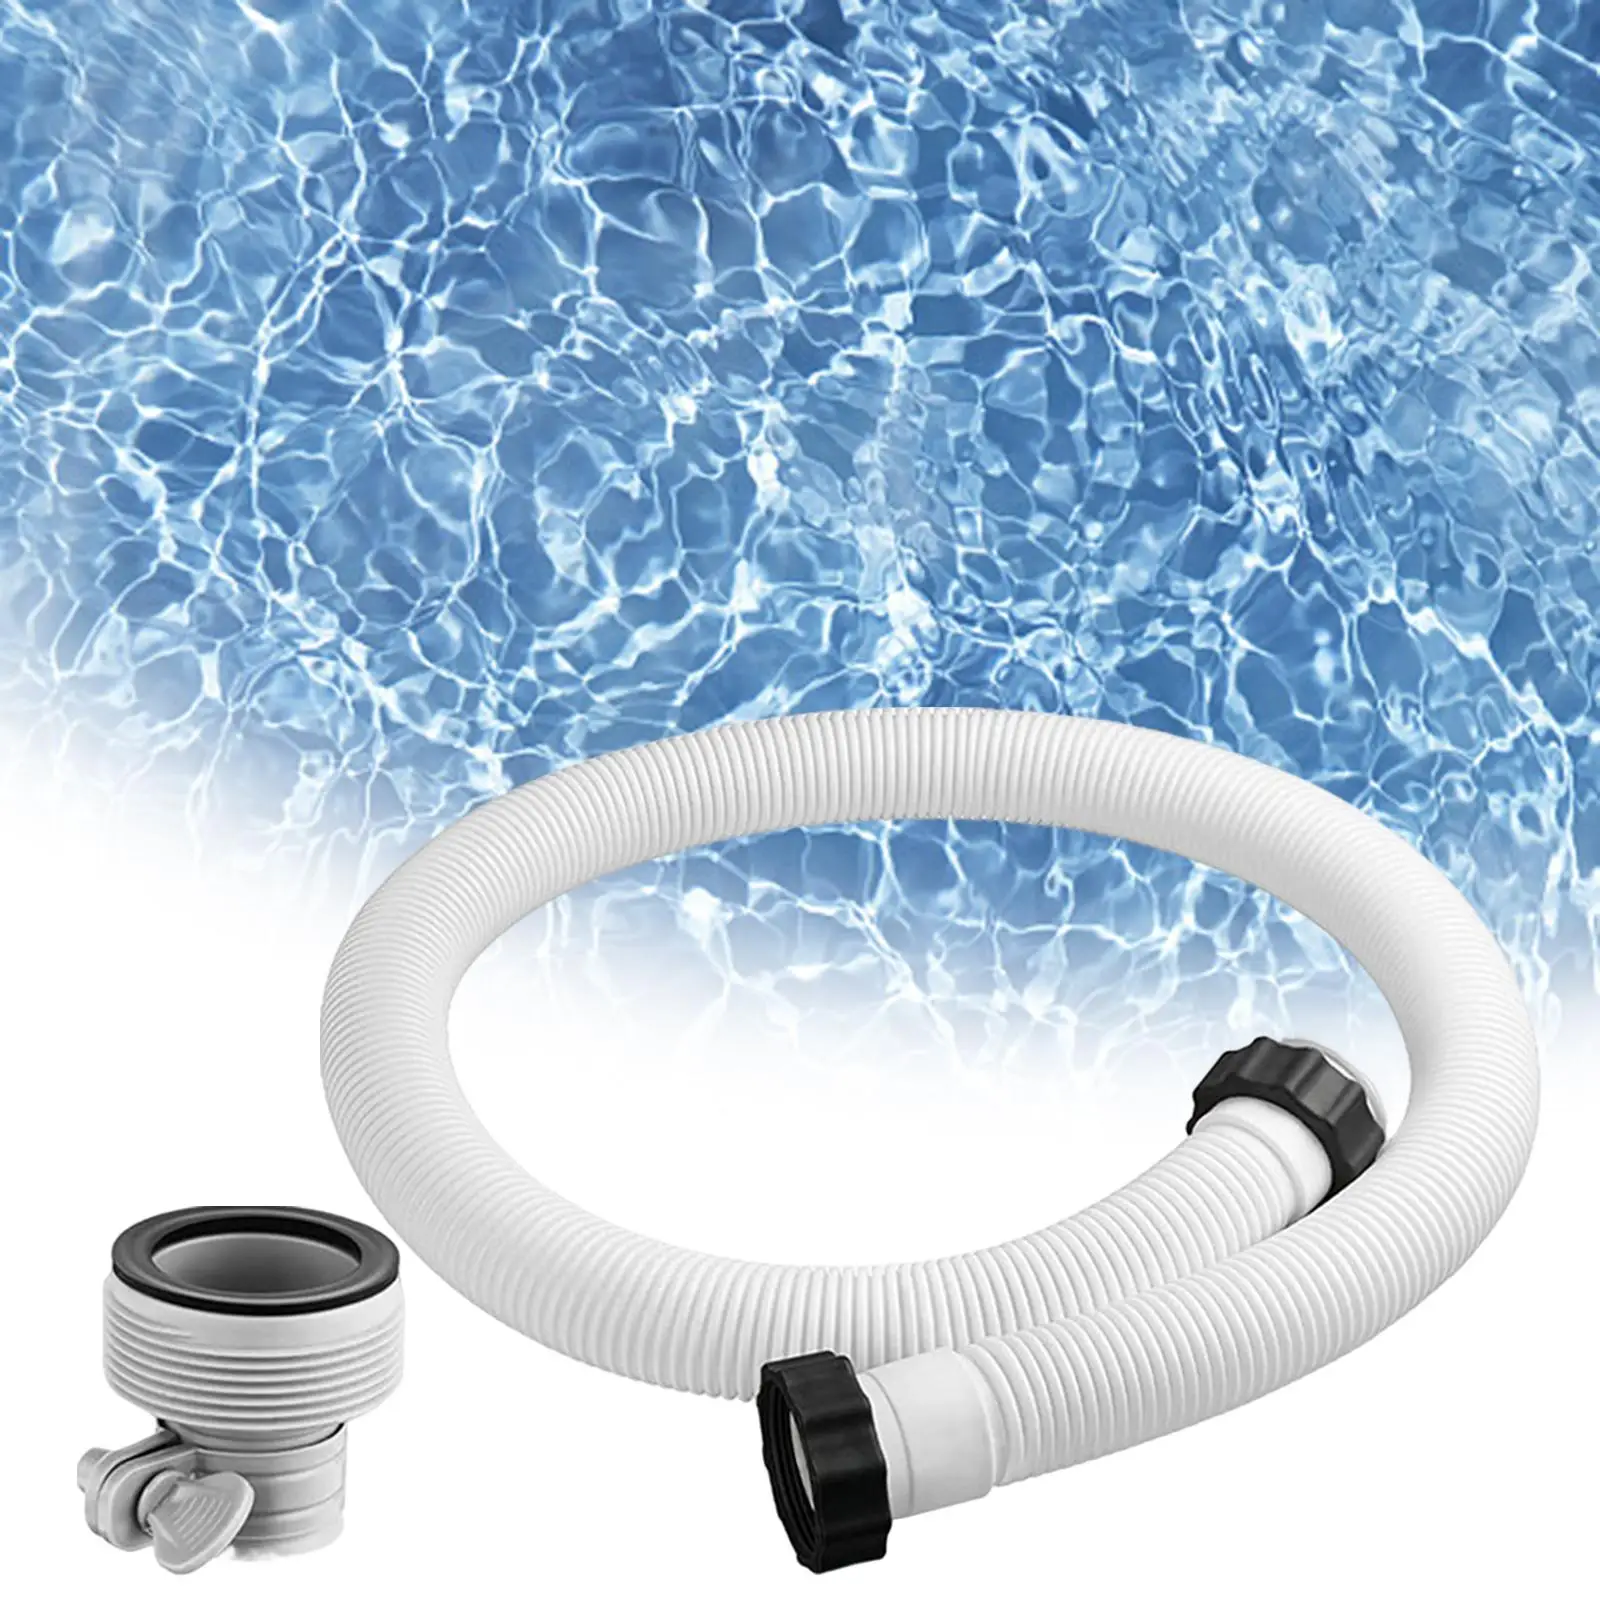 Pool Filter Replacement Hose Flexible 59inch Portable Leakproof Swimming Pool Hose for Spas Lawns Garden Hot Tubs Sand Filter